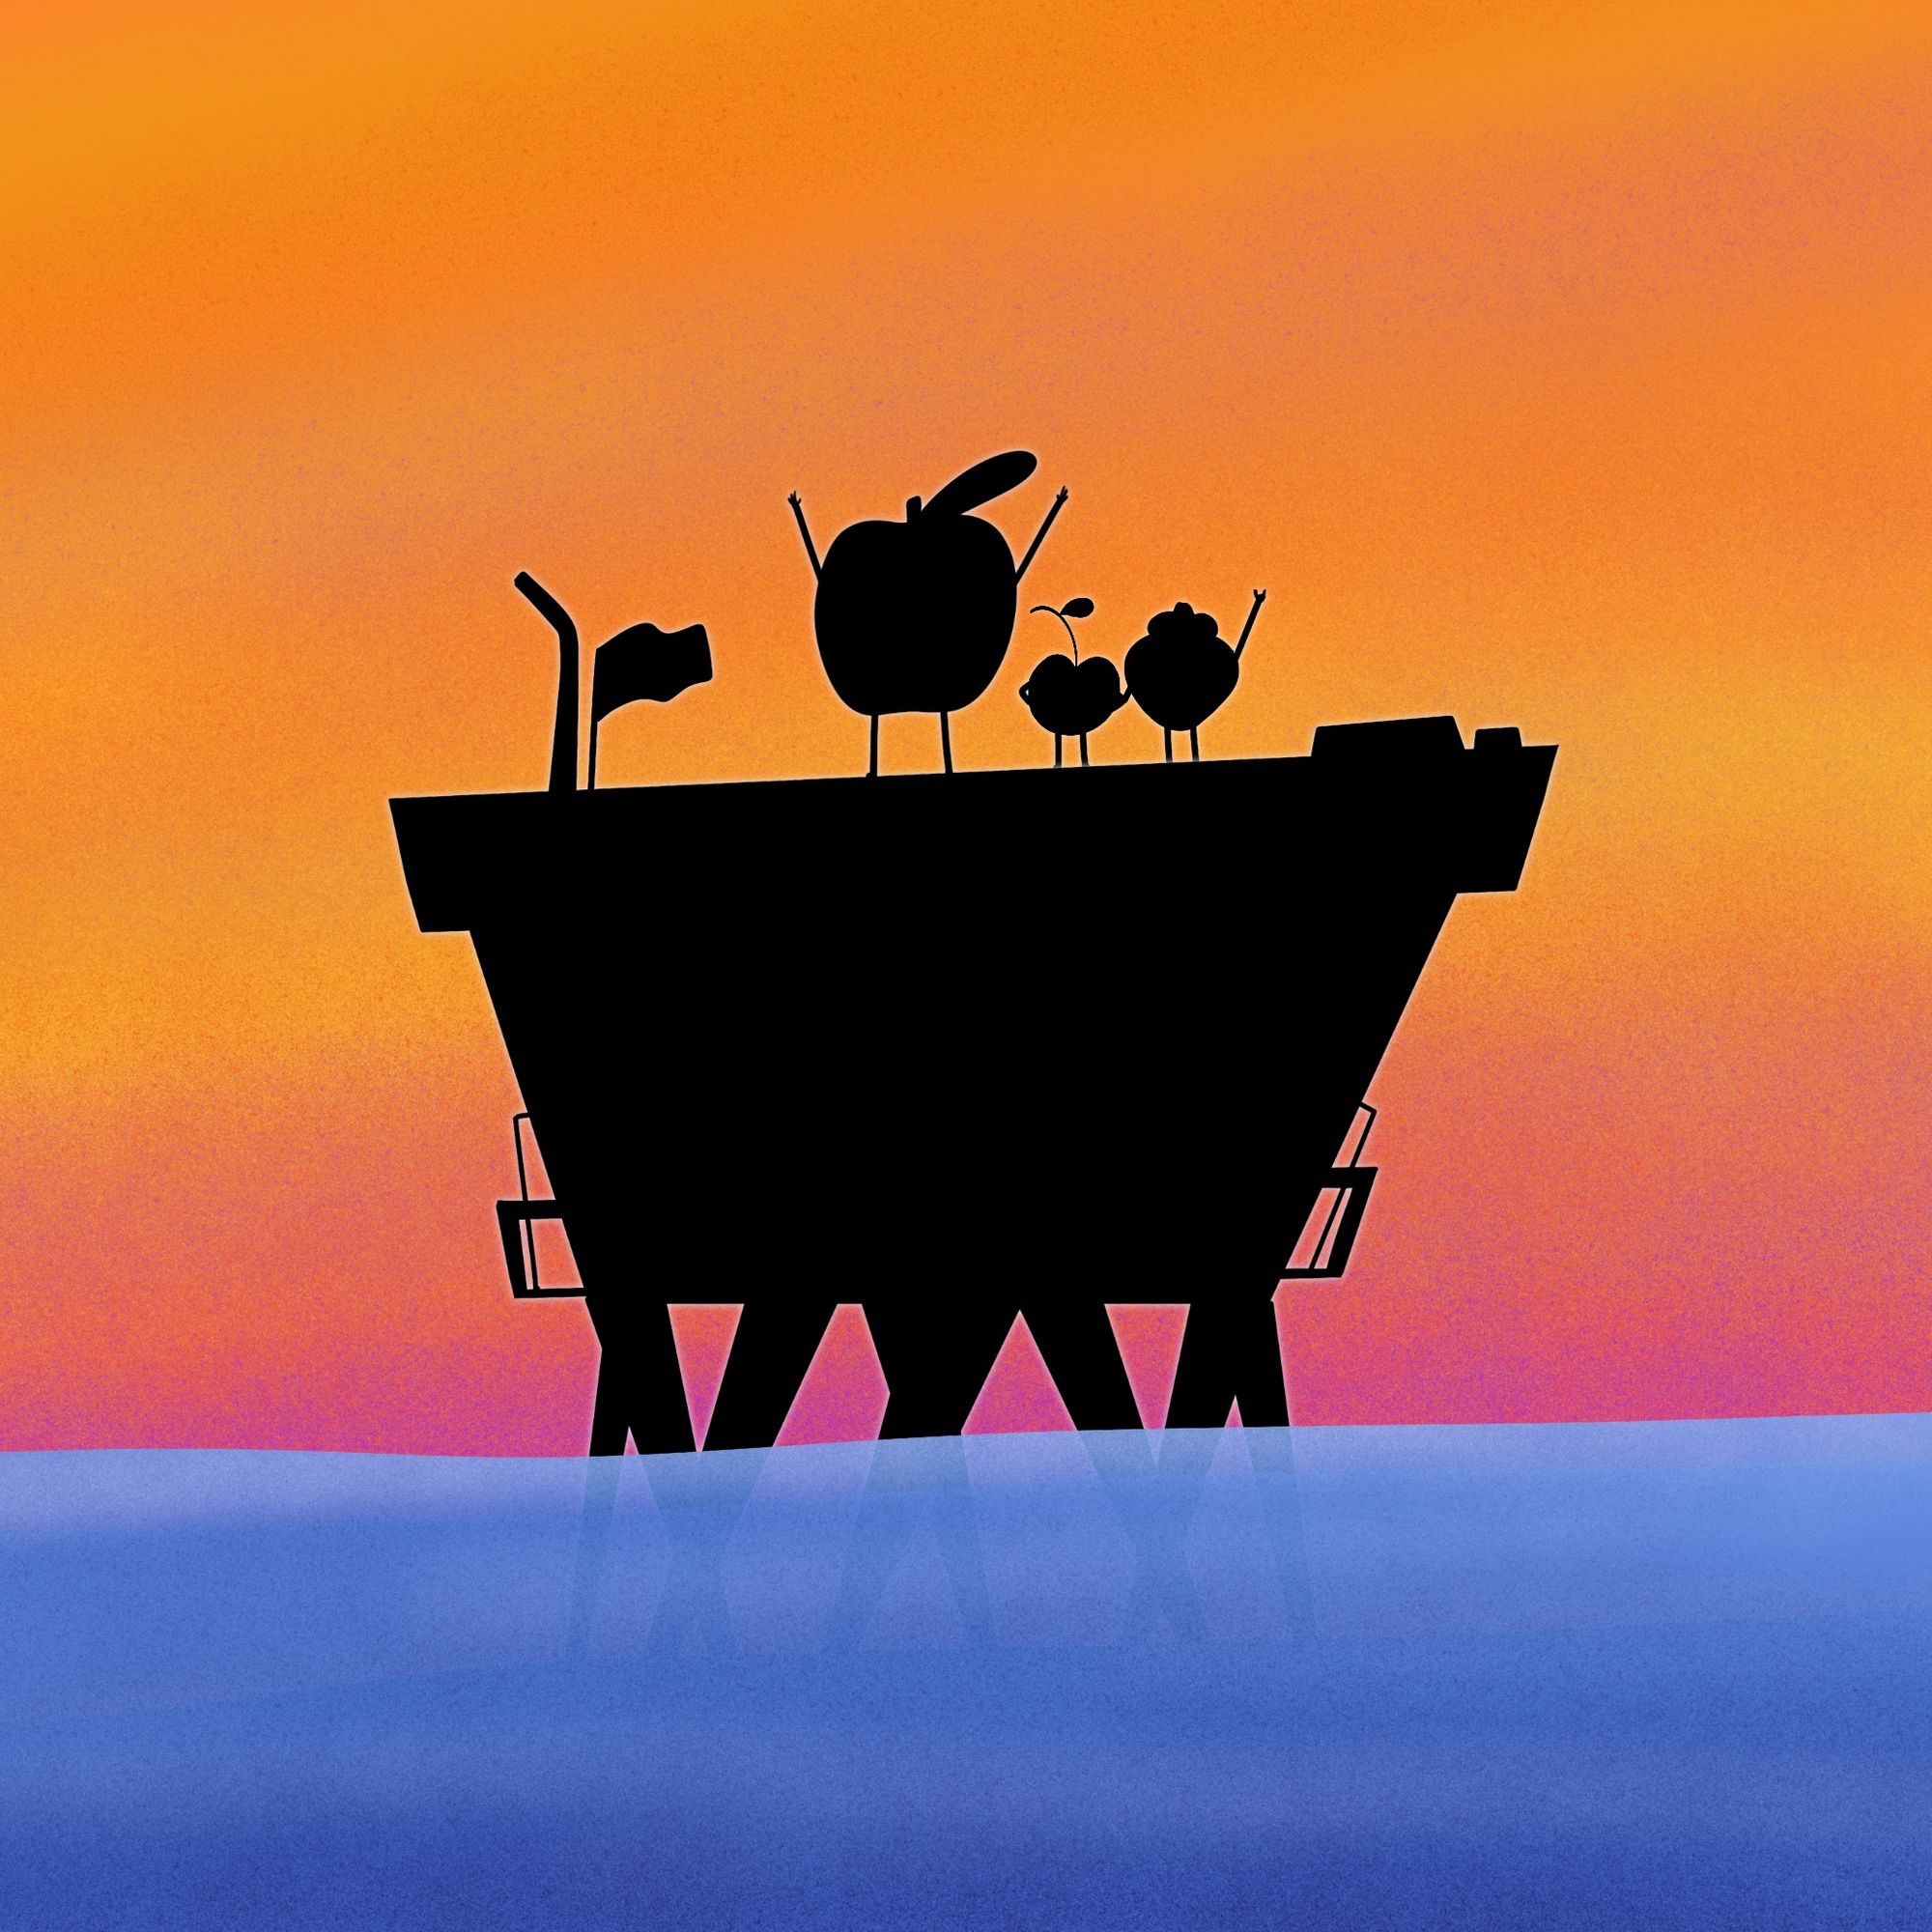 A picture of few fruit mascots standing on an man-made island in the middle of the sea. 